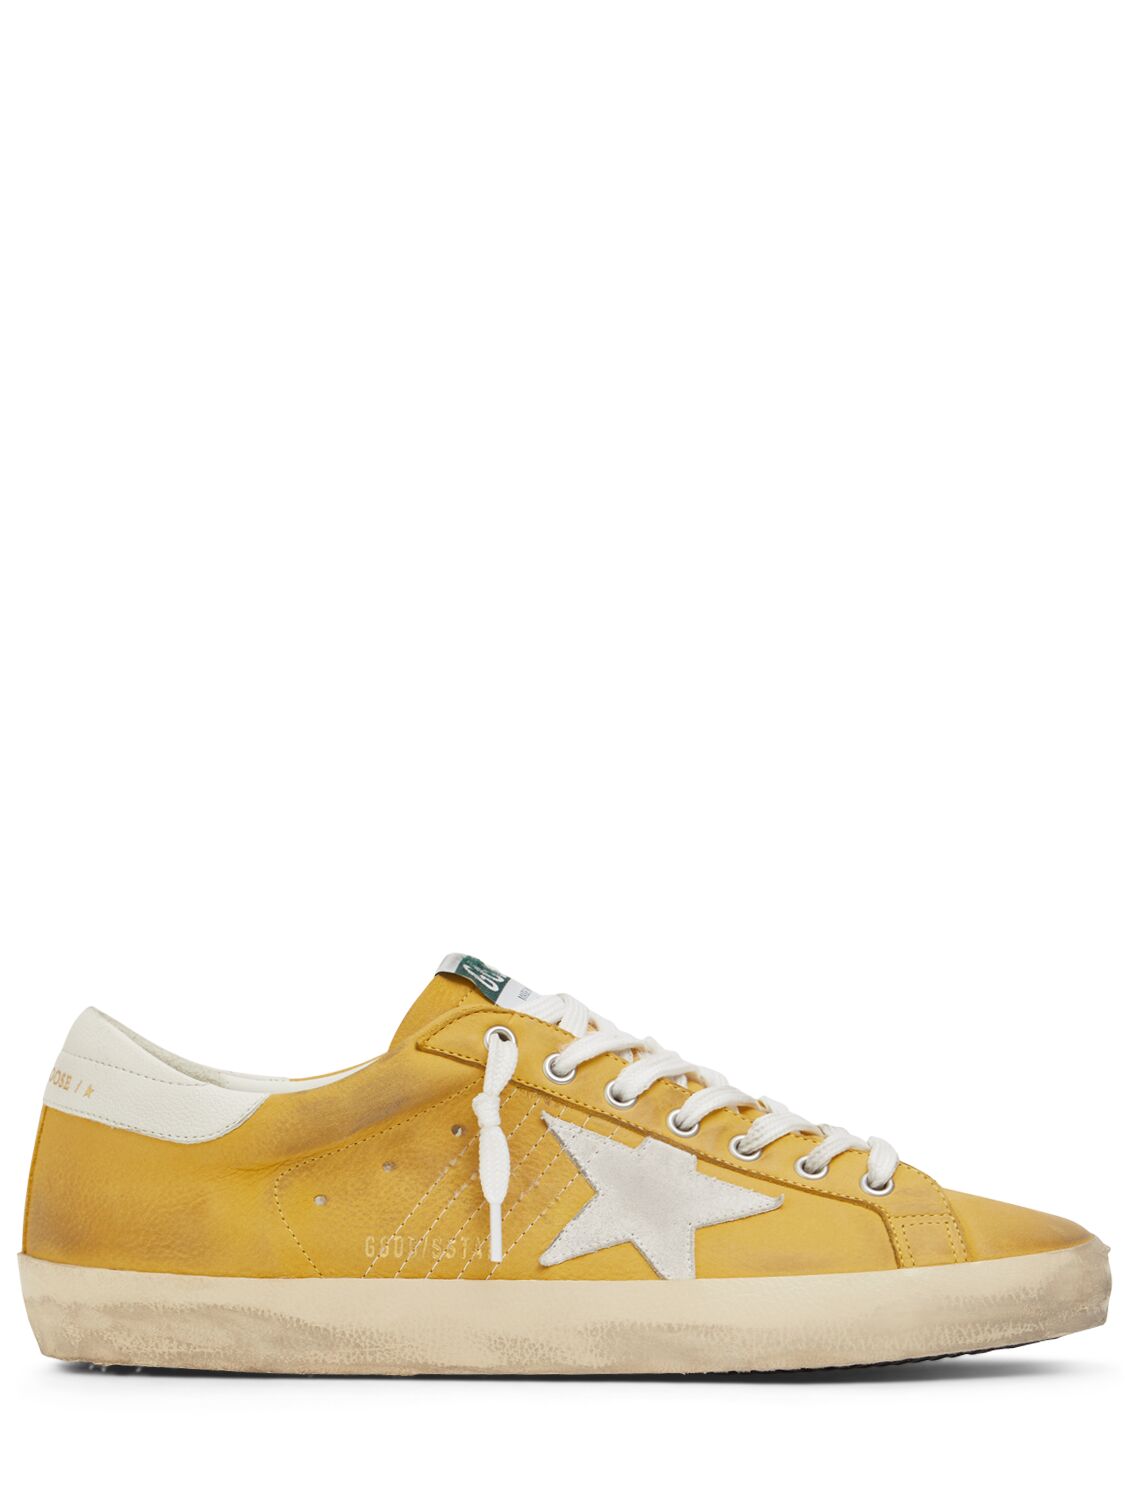 Image of Super Star Suede Sneakers